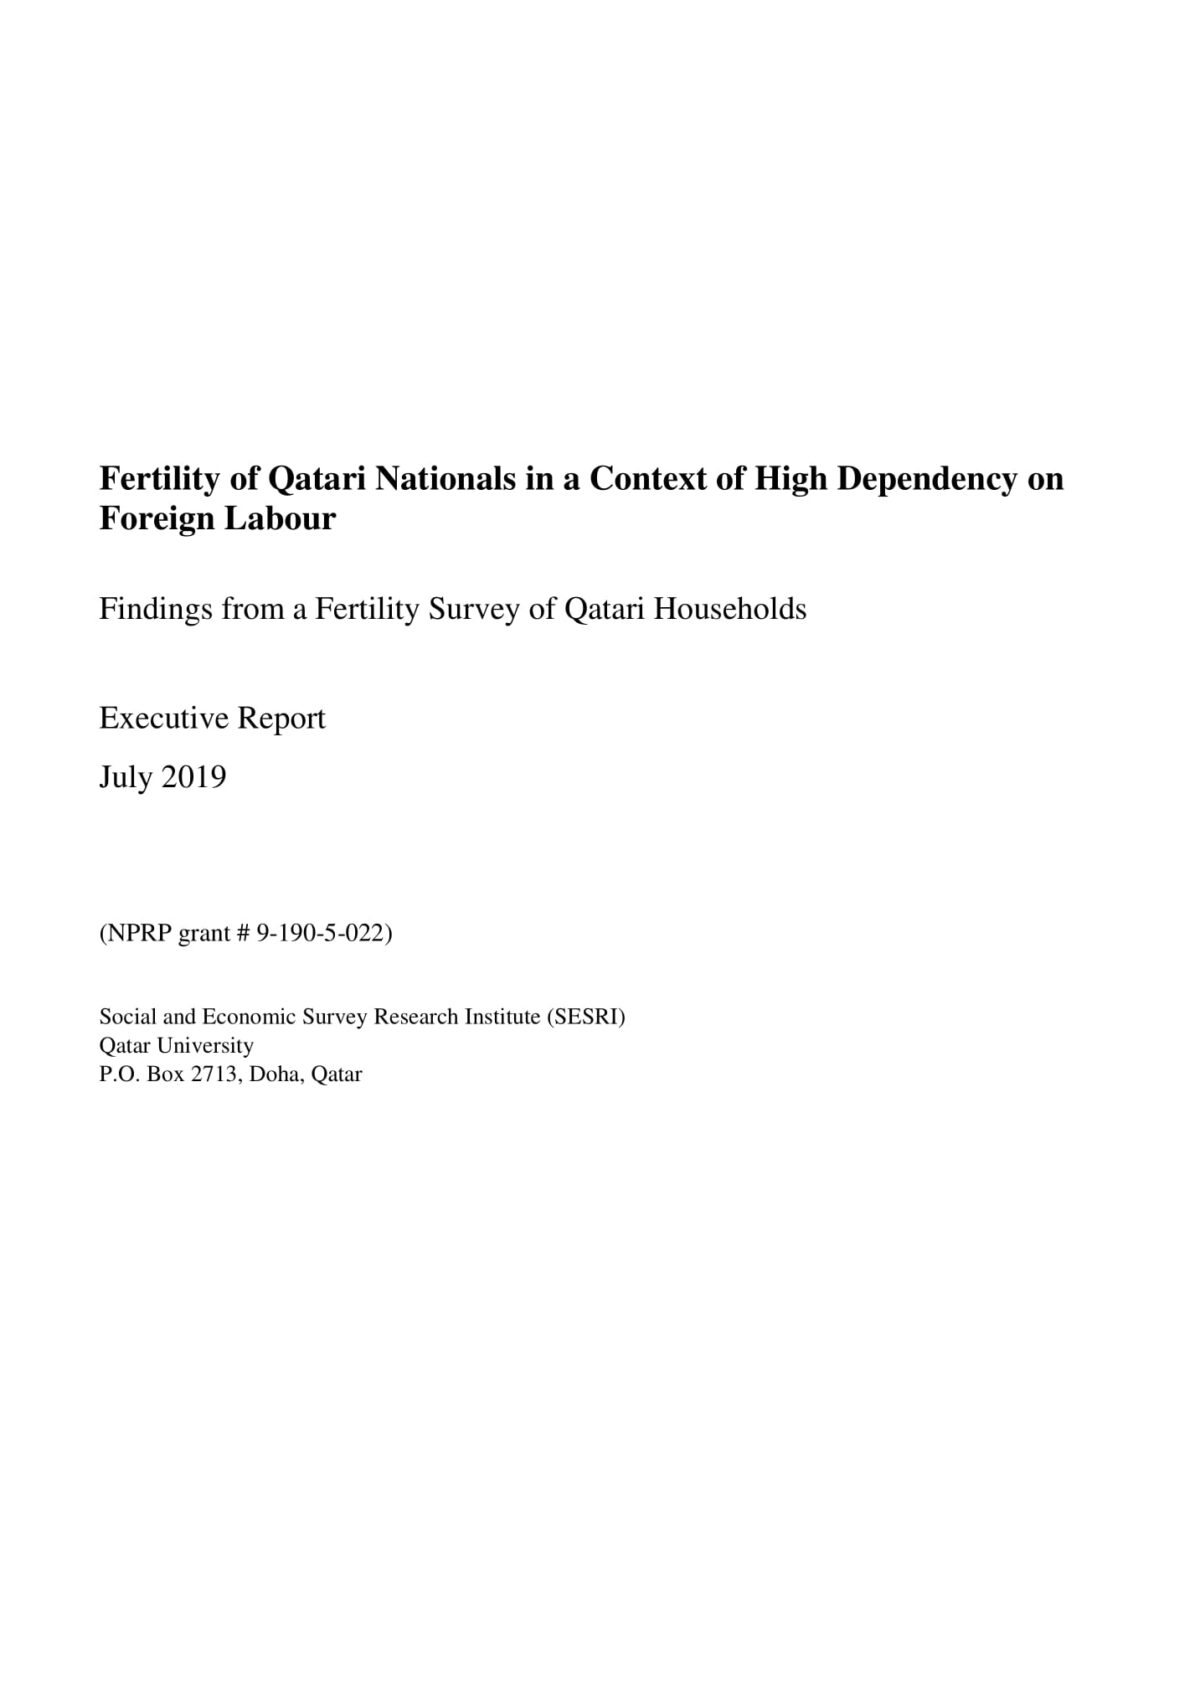 Fertility of Qatari Nationals in a Context of High Dependency on Foreign Labour